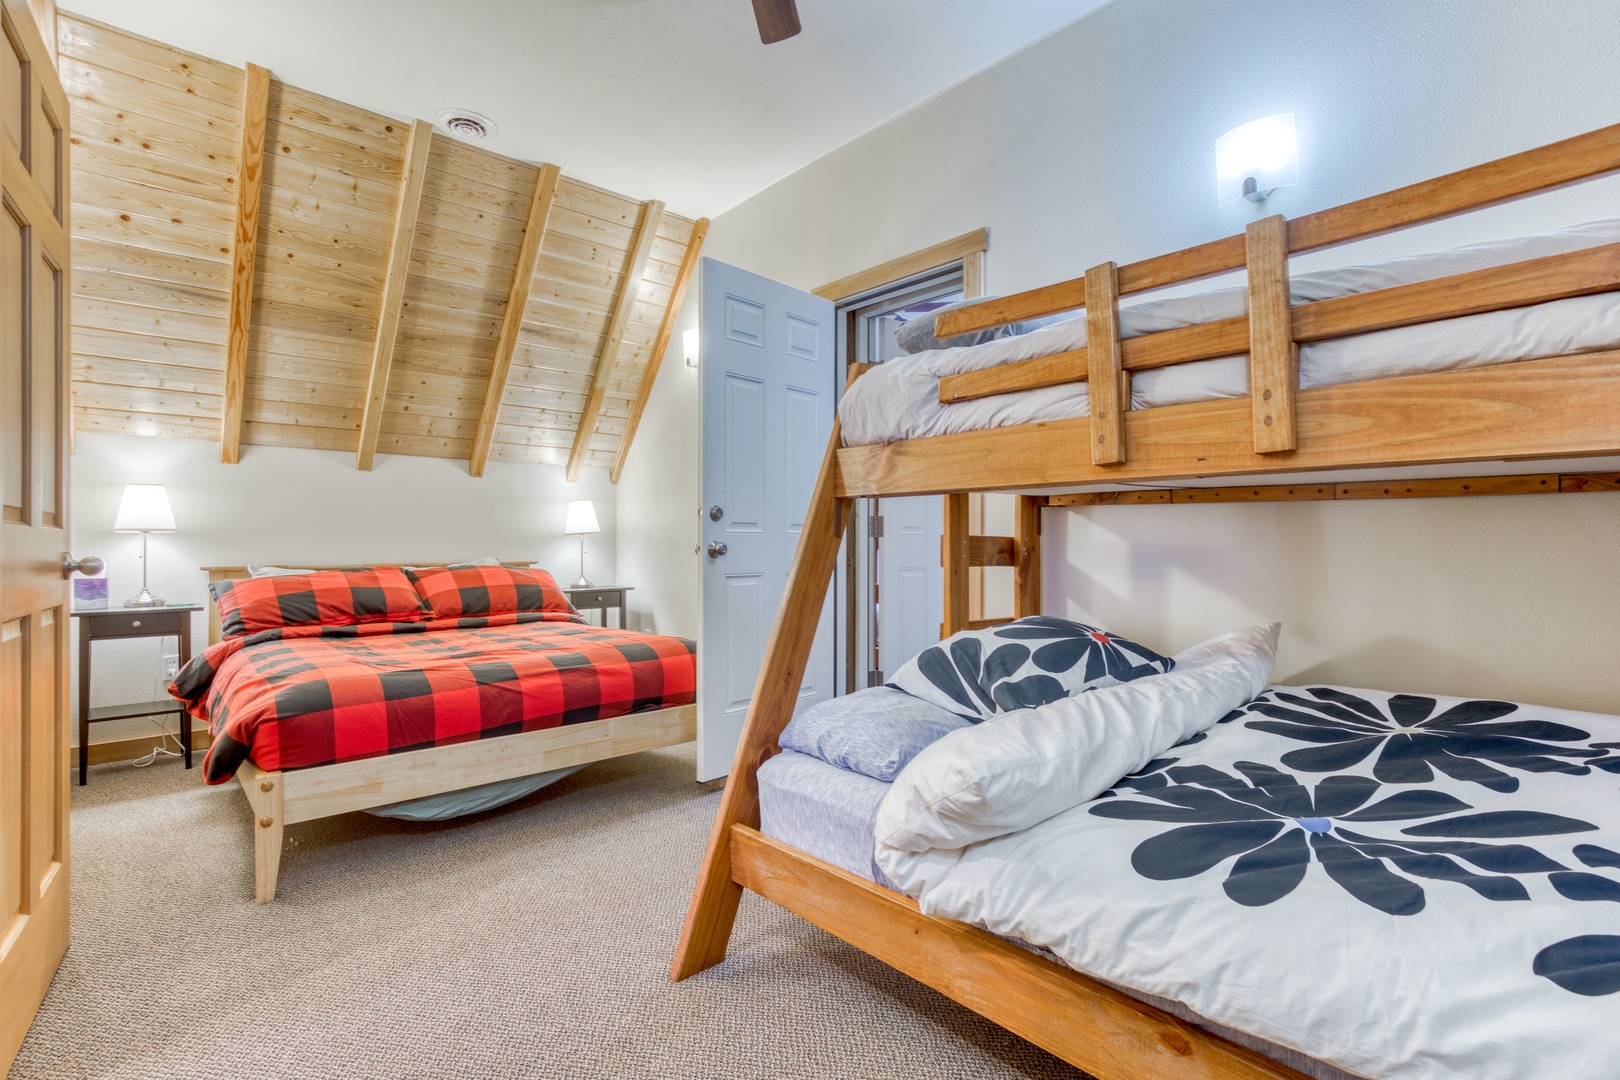 Government Camp Vacation Rentals, Glade Trail Lodge - Another room with queen a bunk bed